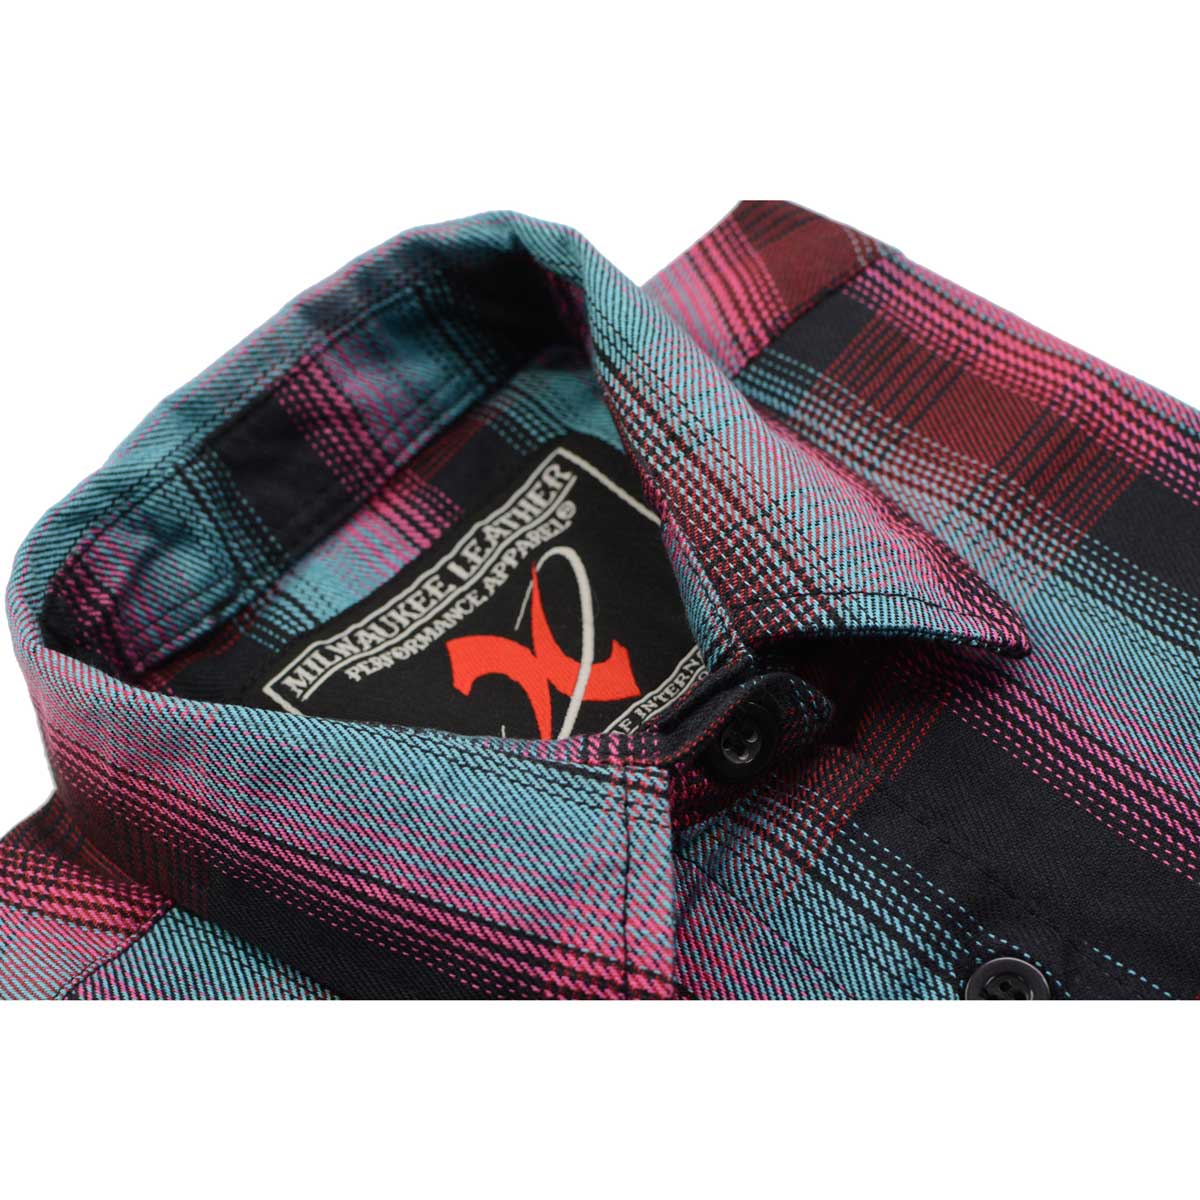 Milwaukee Leather MNG21612 Women's Black and Pink with Blue Long Sleeve Cotton Flannel Shirt